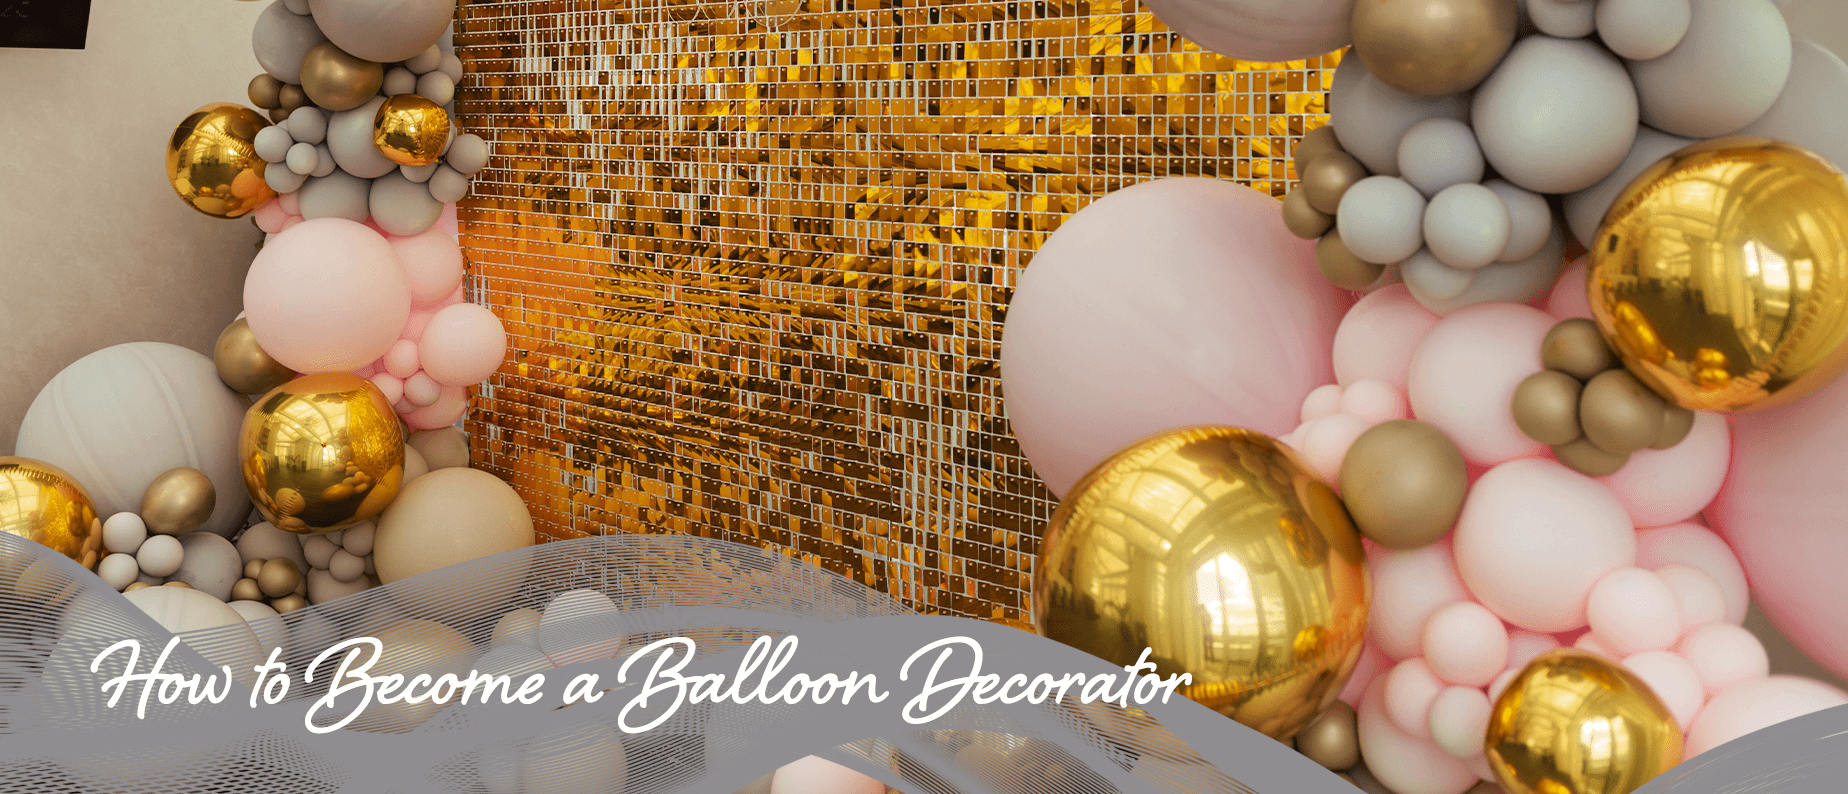 how to become a balloon decorator